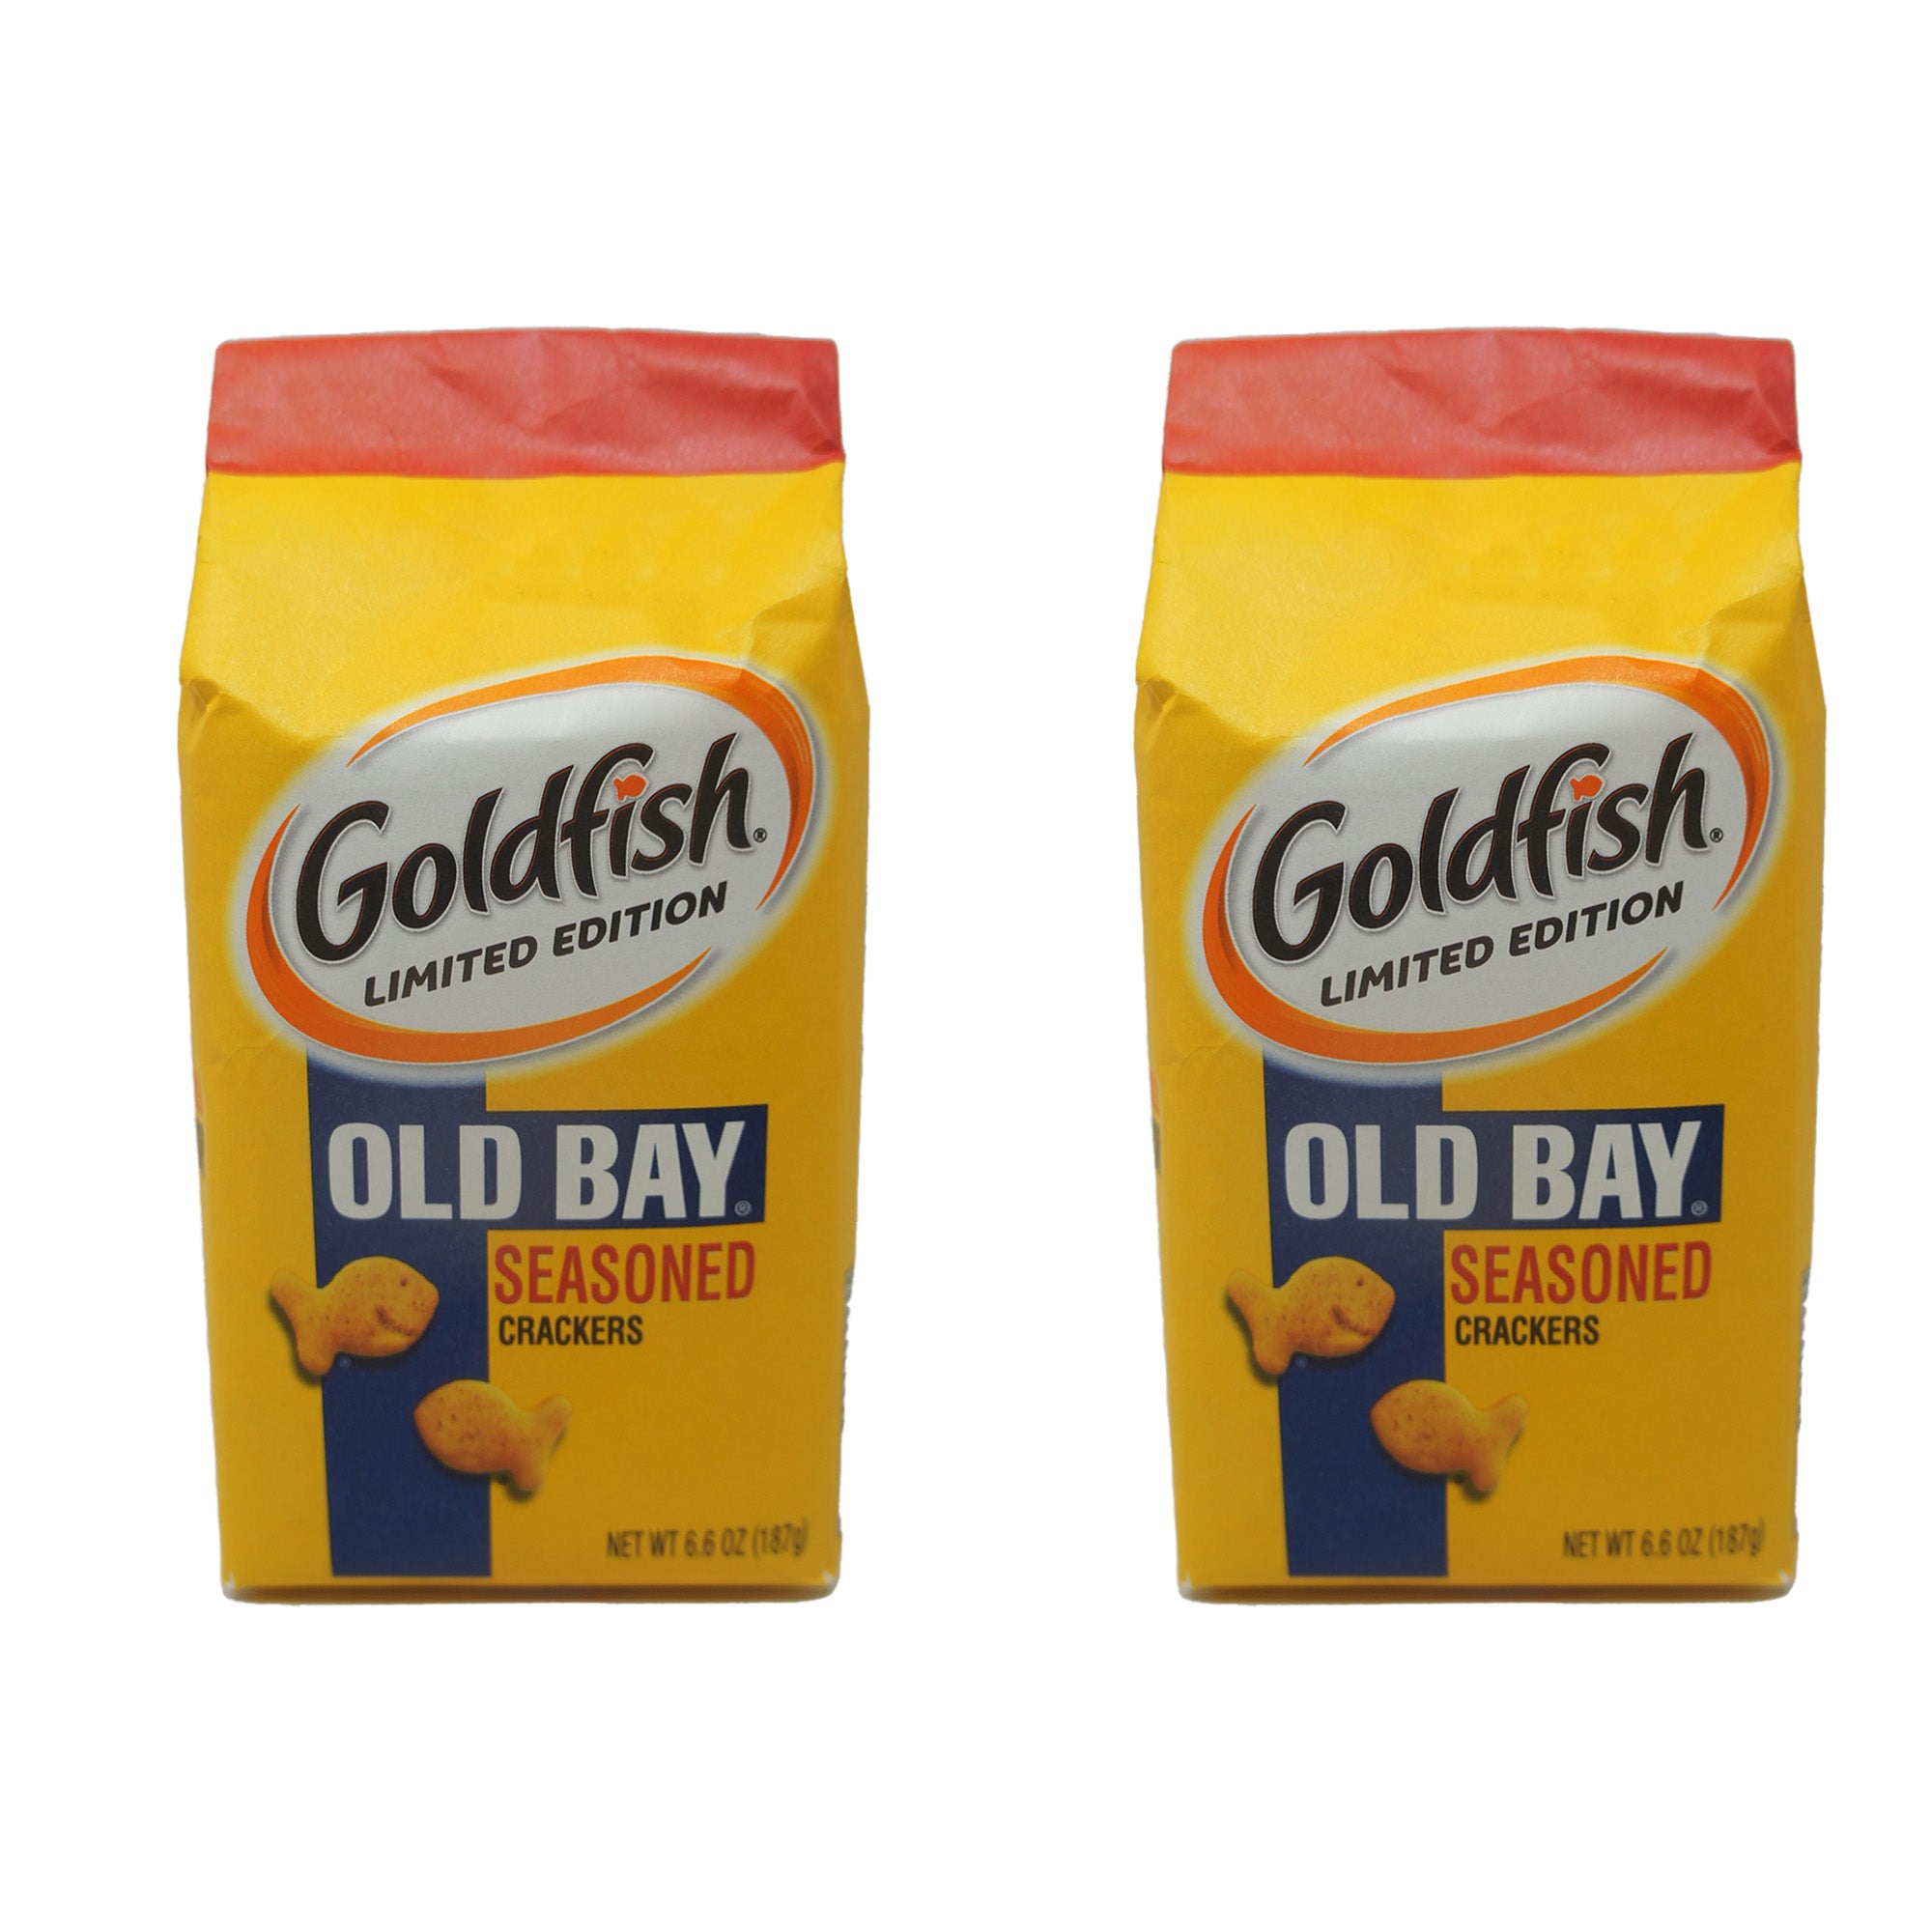 Goldfish Crackers, Old Bay Seasoned, Limited Edition, 6.6 oz per Pack (2 Pack)